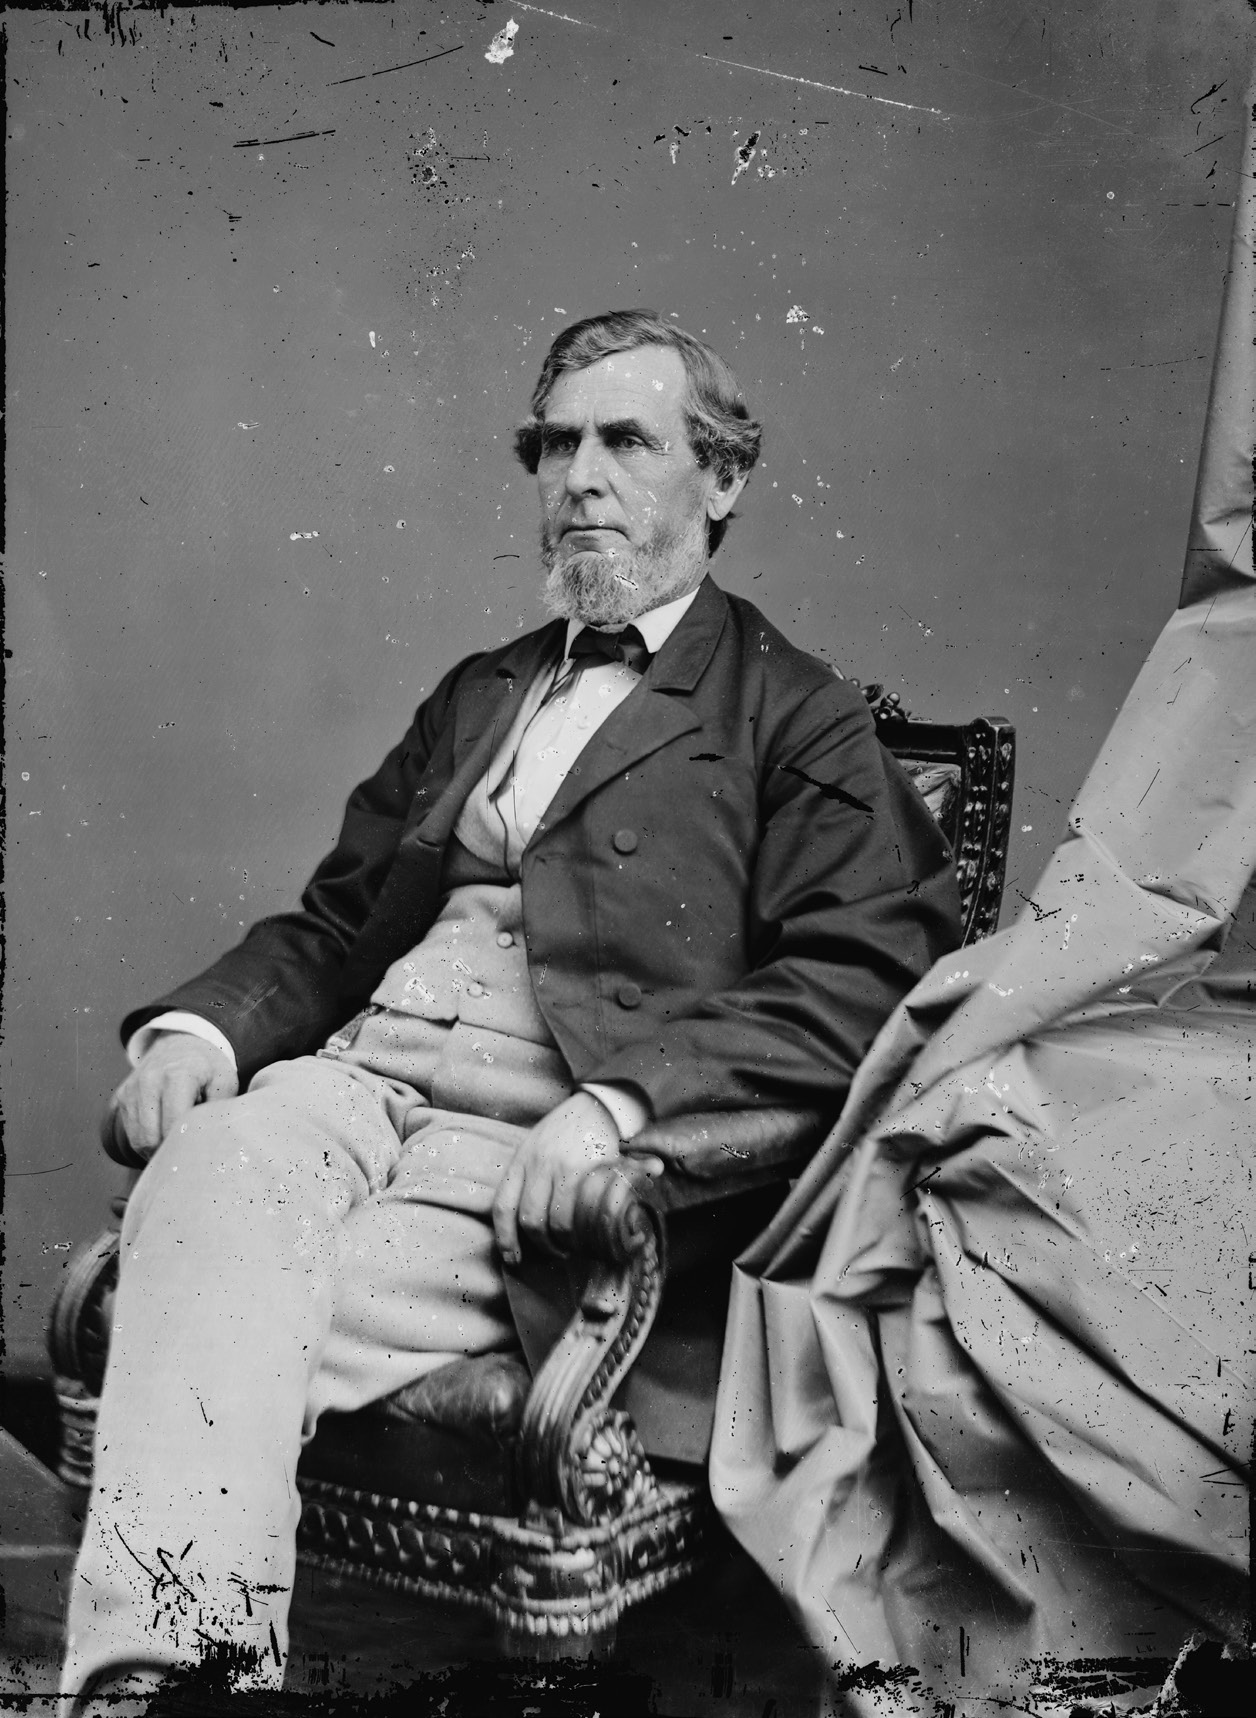 Hon. Columbus Delano of Ohio. Prints and Photographs Division, Library of Congress, LC-DIG-cwpbh-00685.